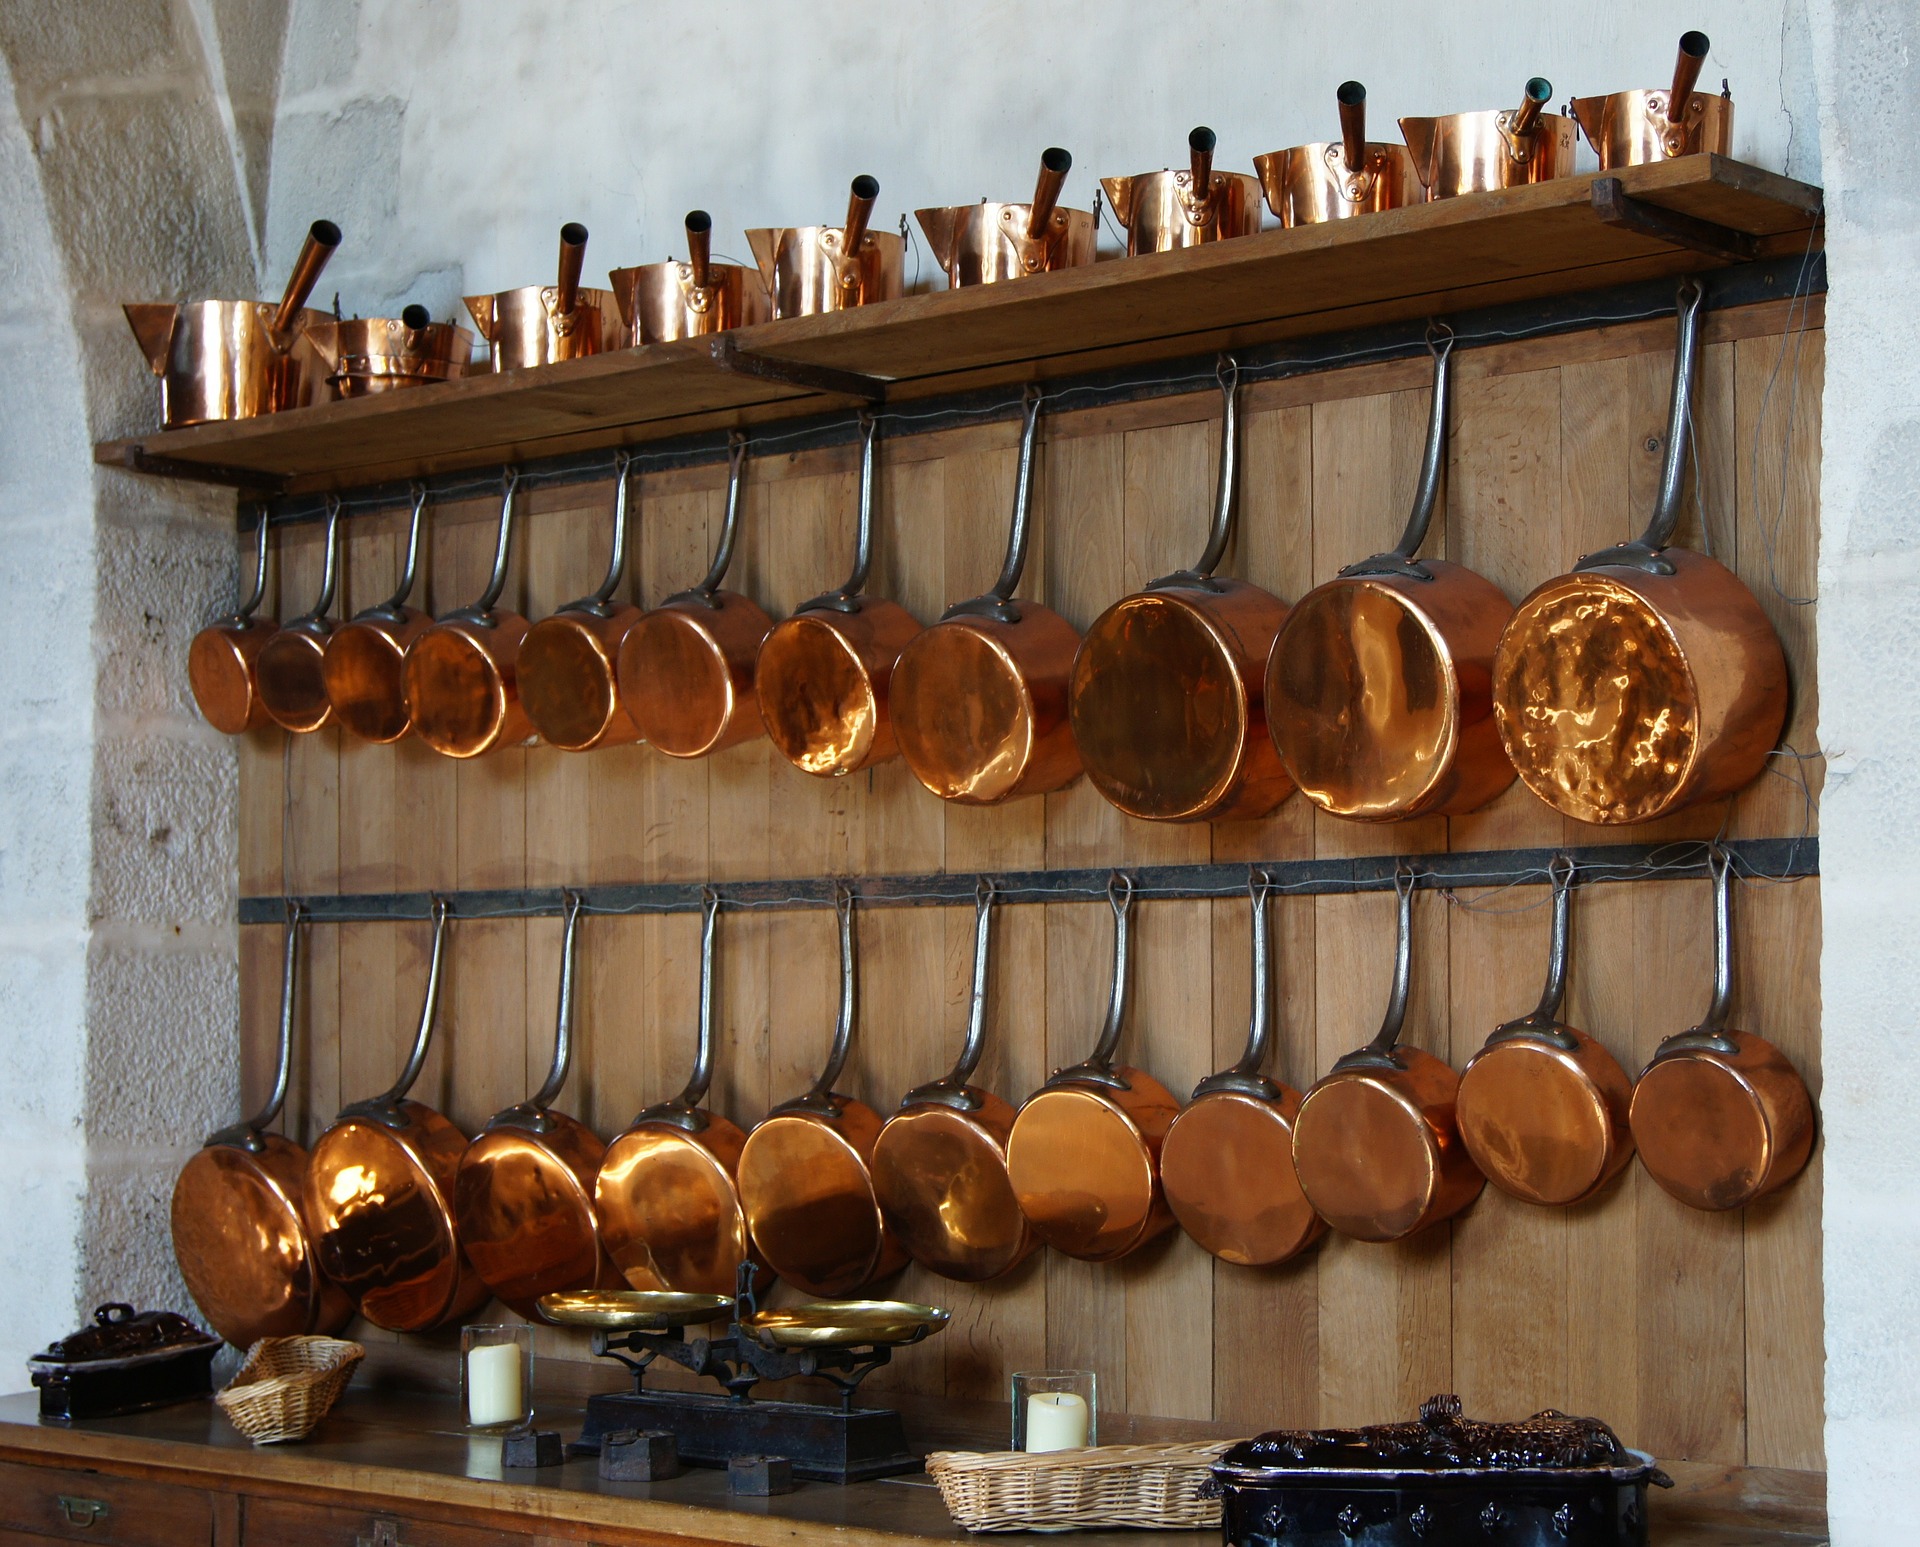 3 Ideas for Storing Pots and Pans More Effectively's featured image